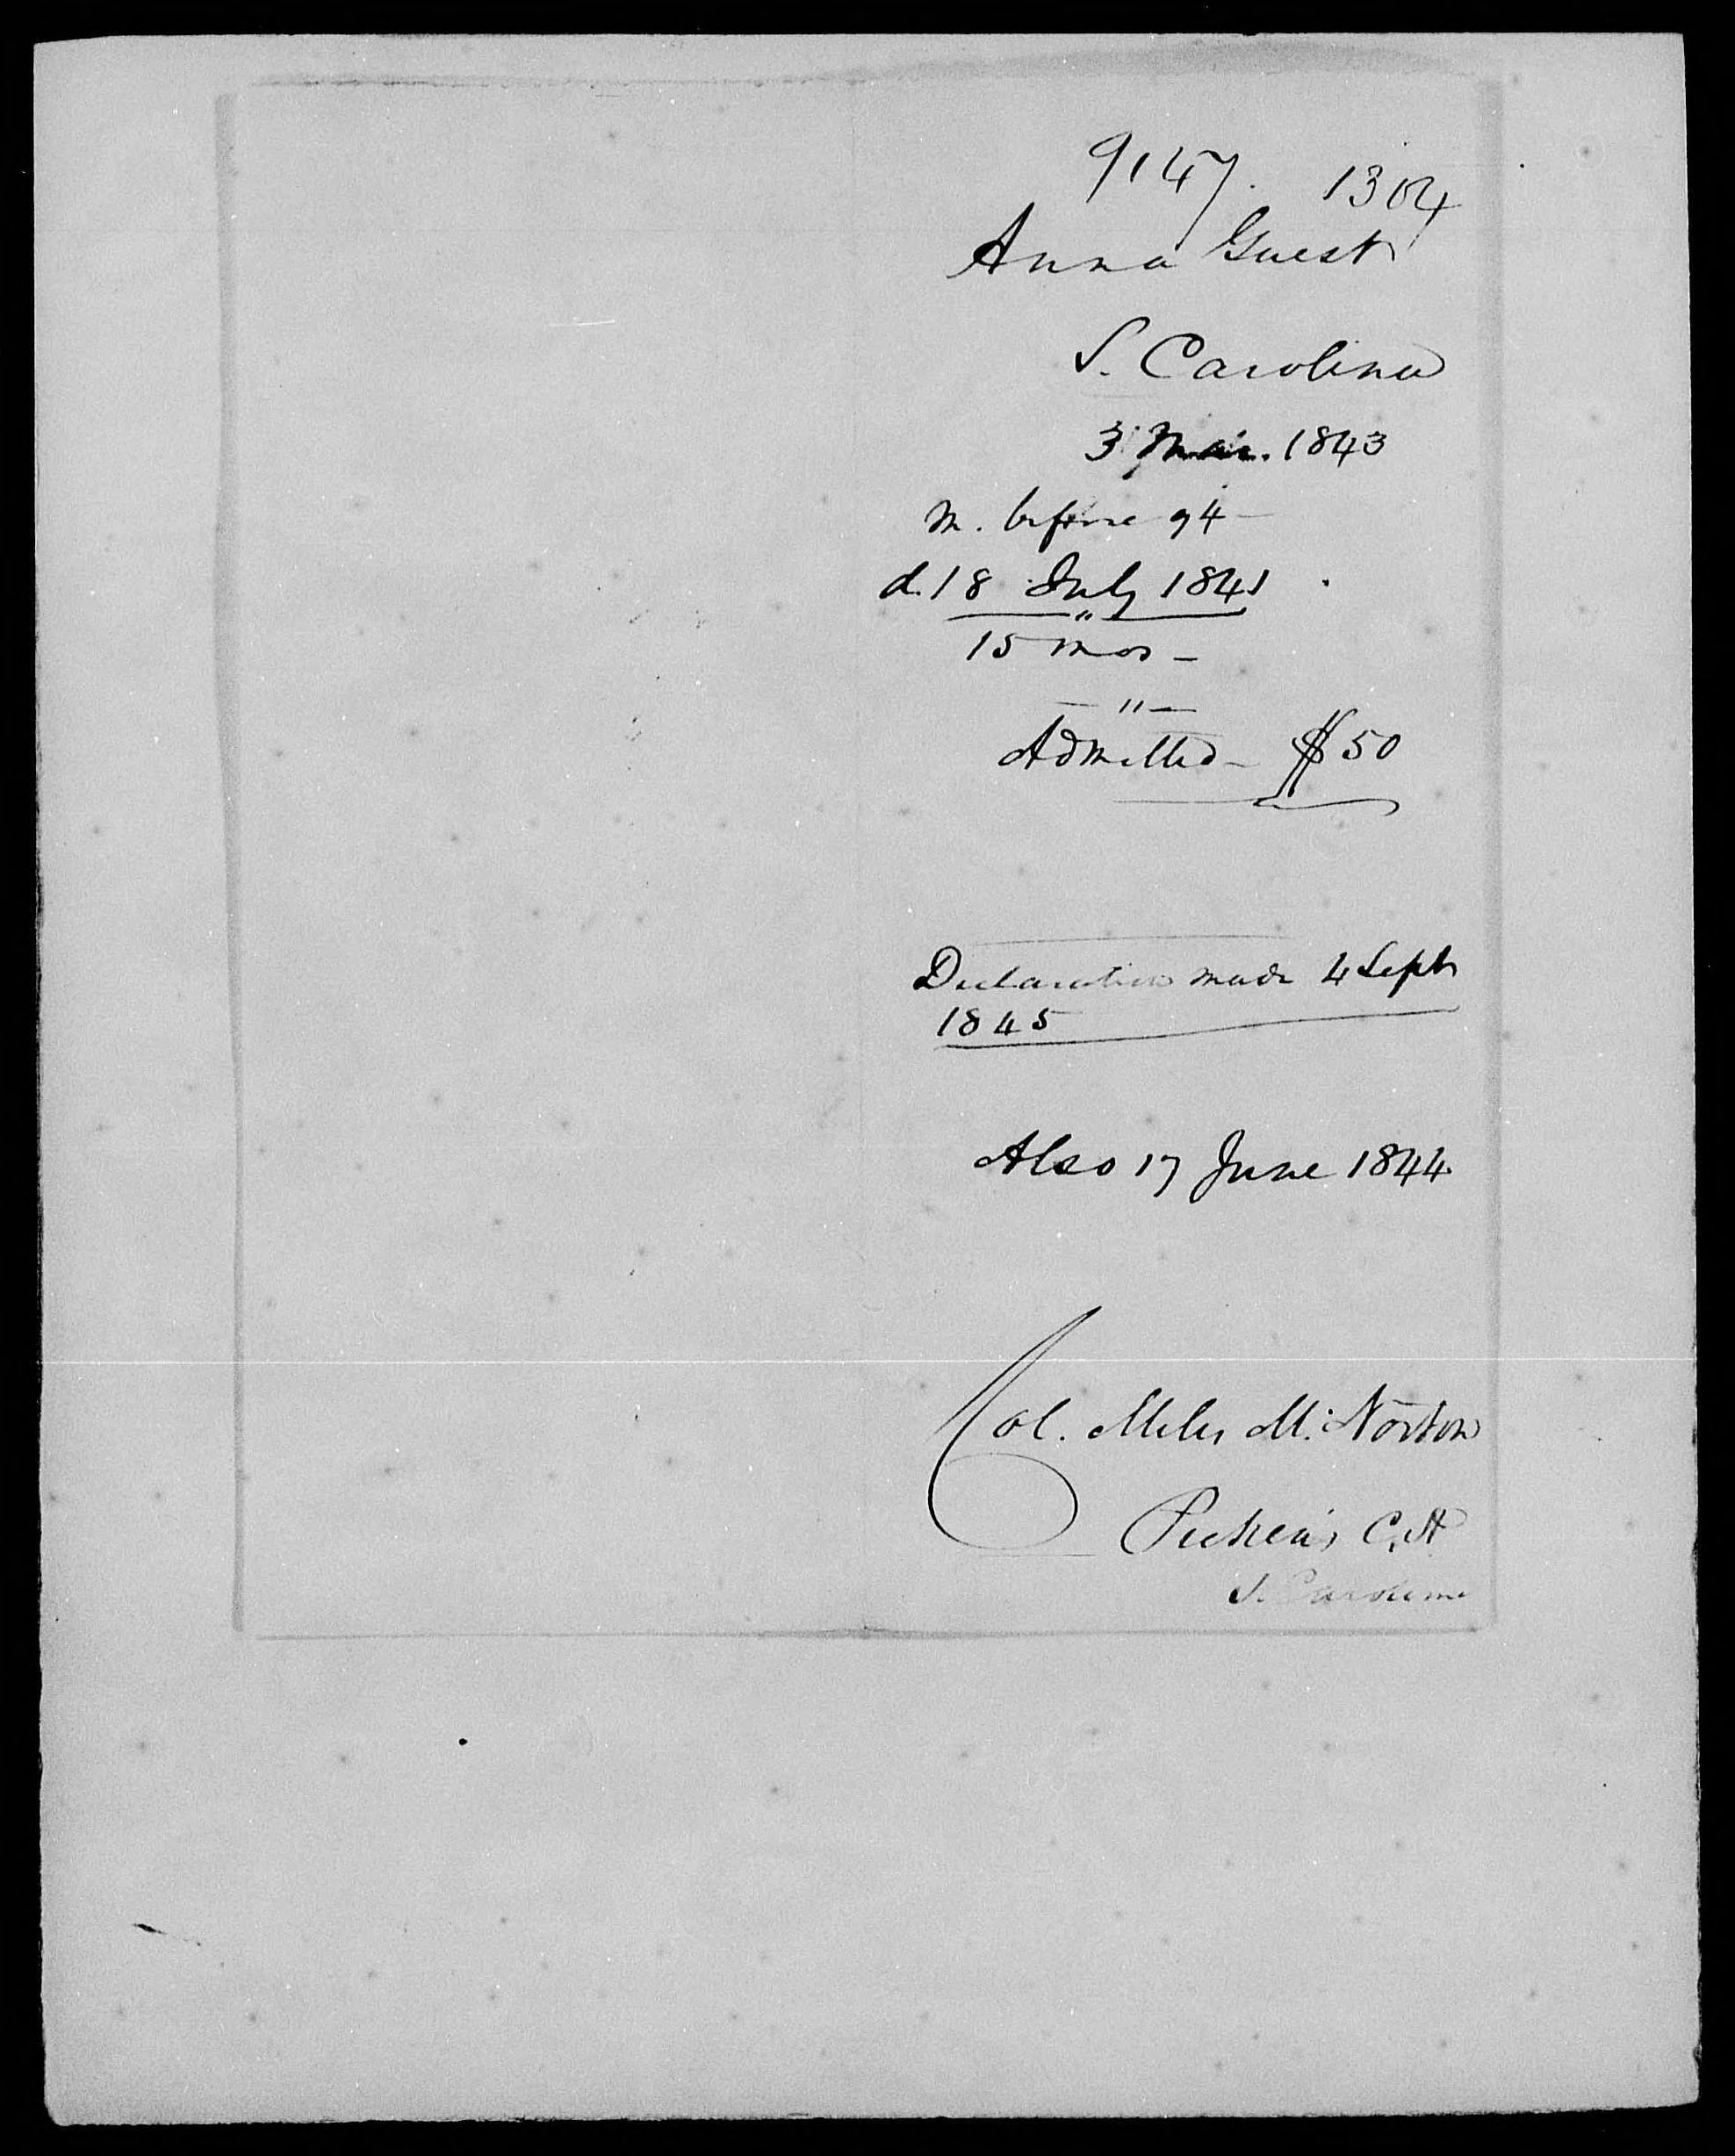 Application for a Widow's Pension from Anna Guest, 27 November 1846, page 2